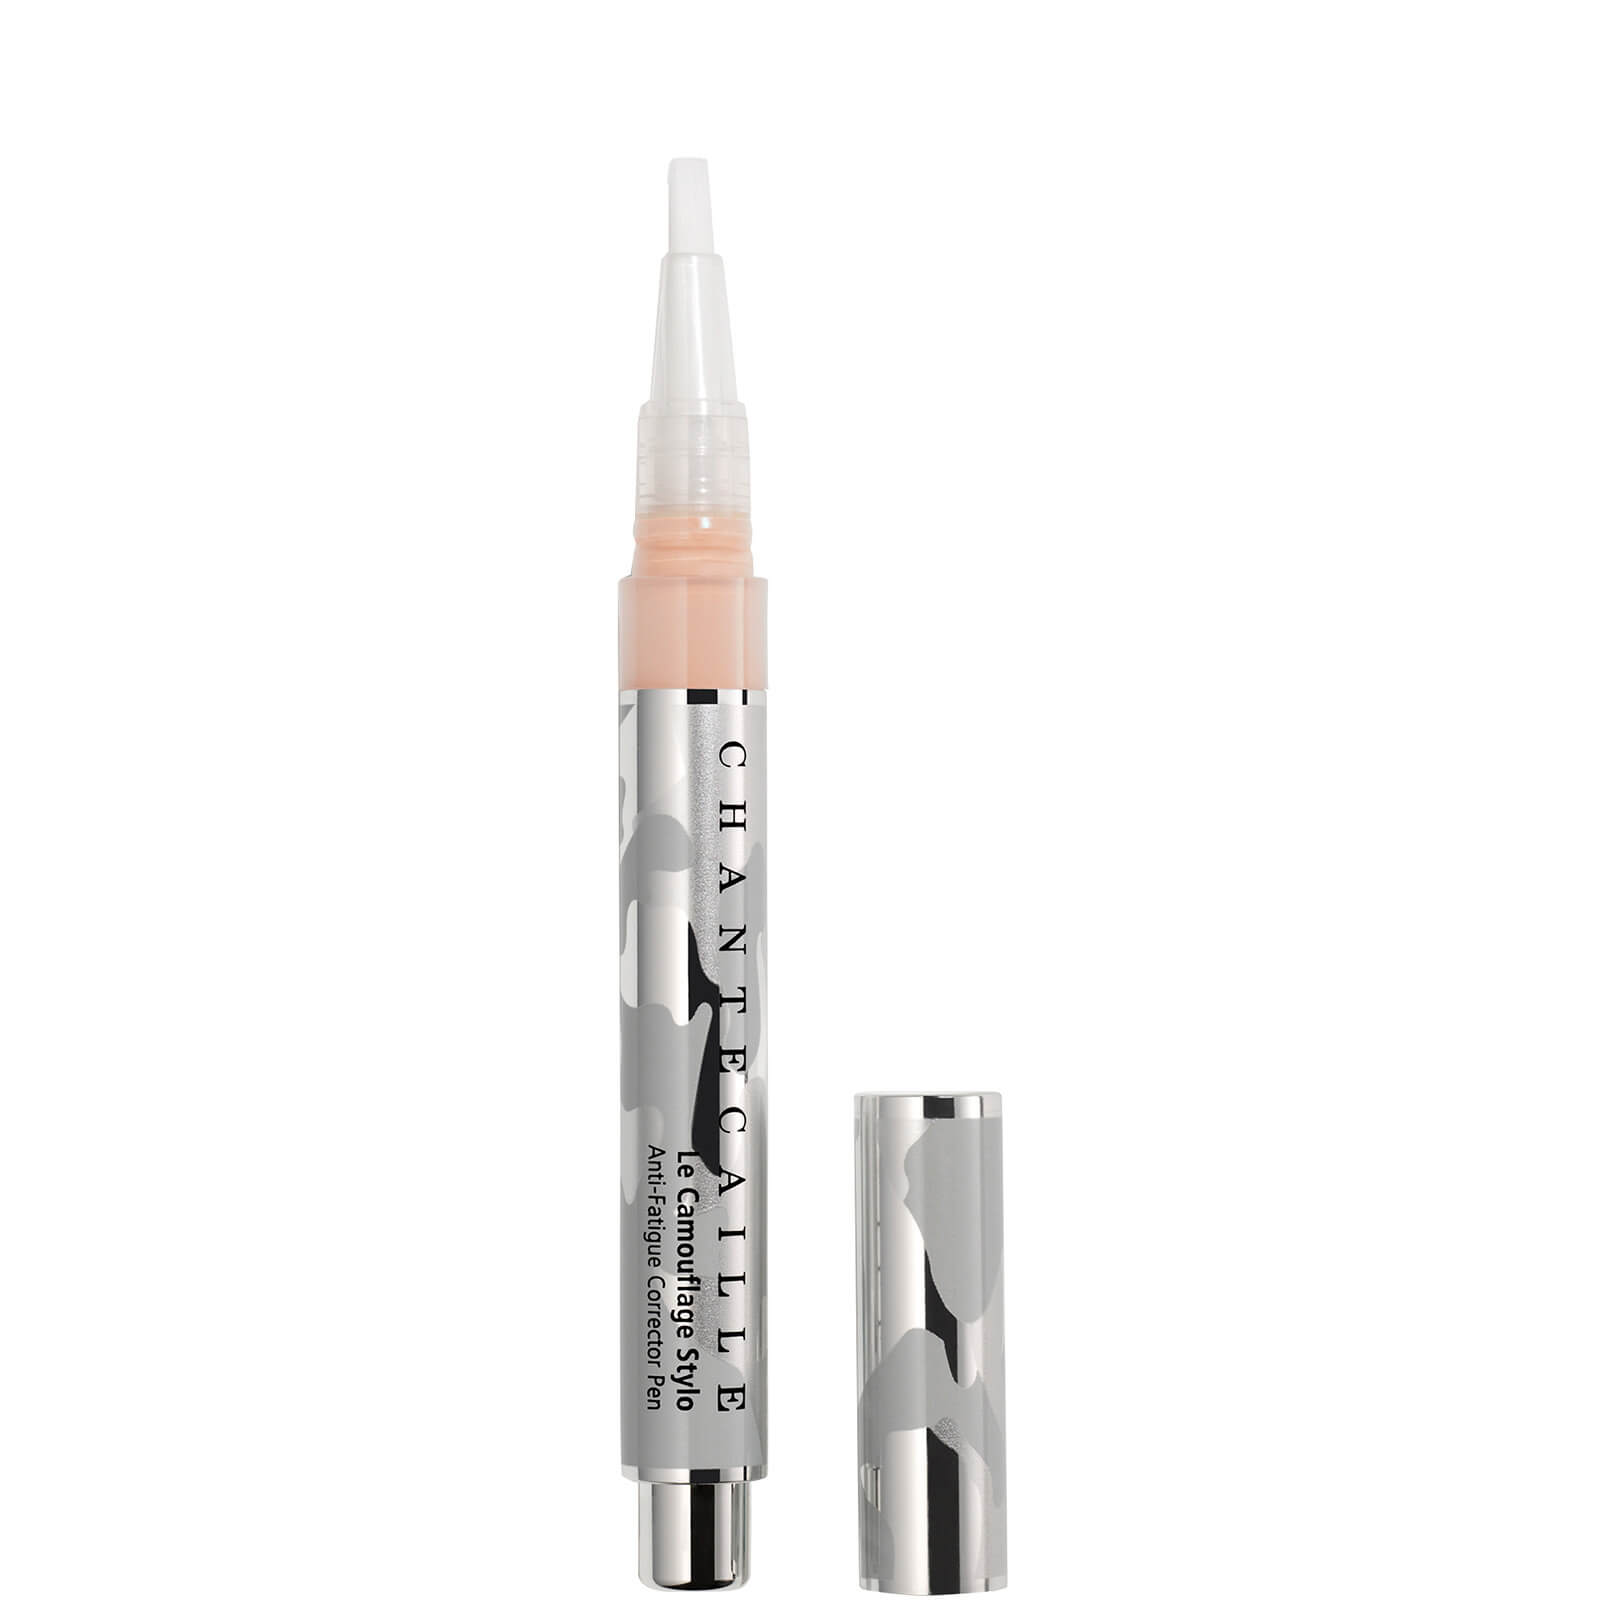 Chantecaille Le Camouflage Stylo Concealer - #1